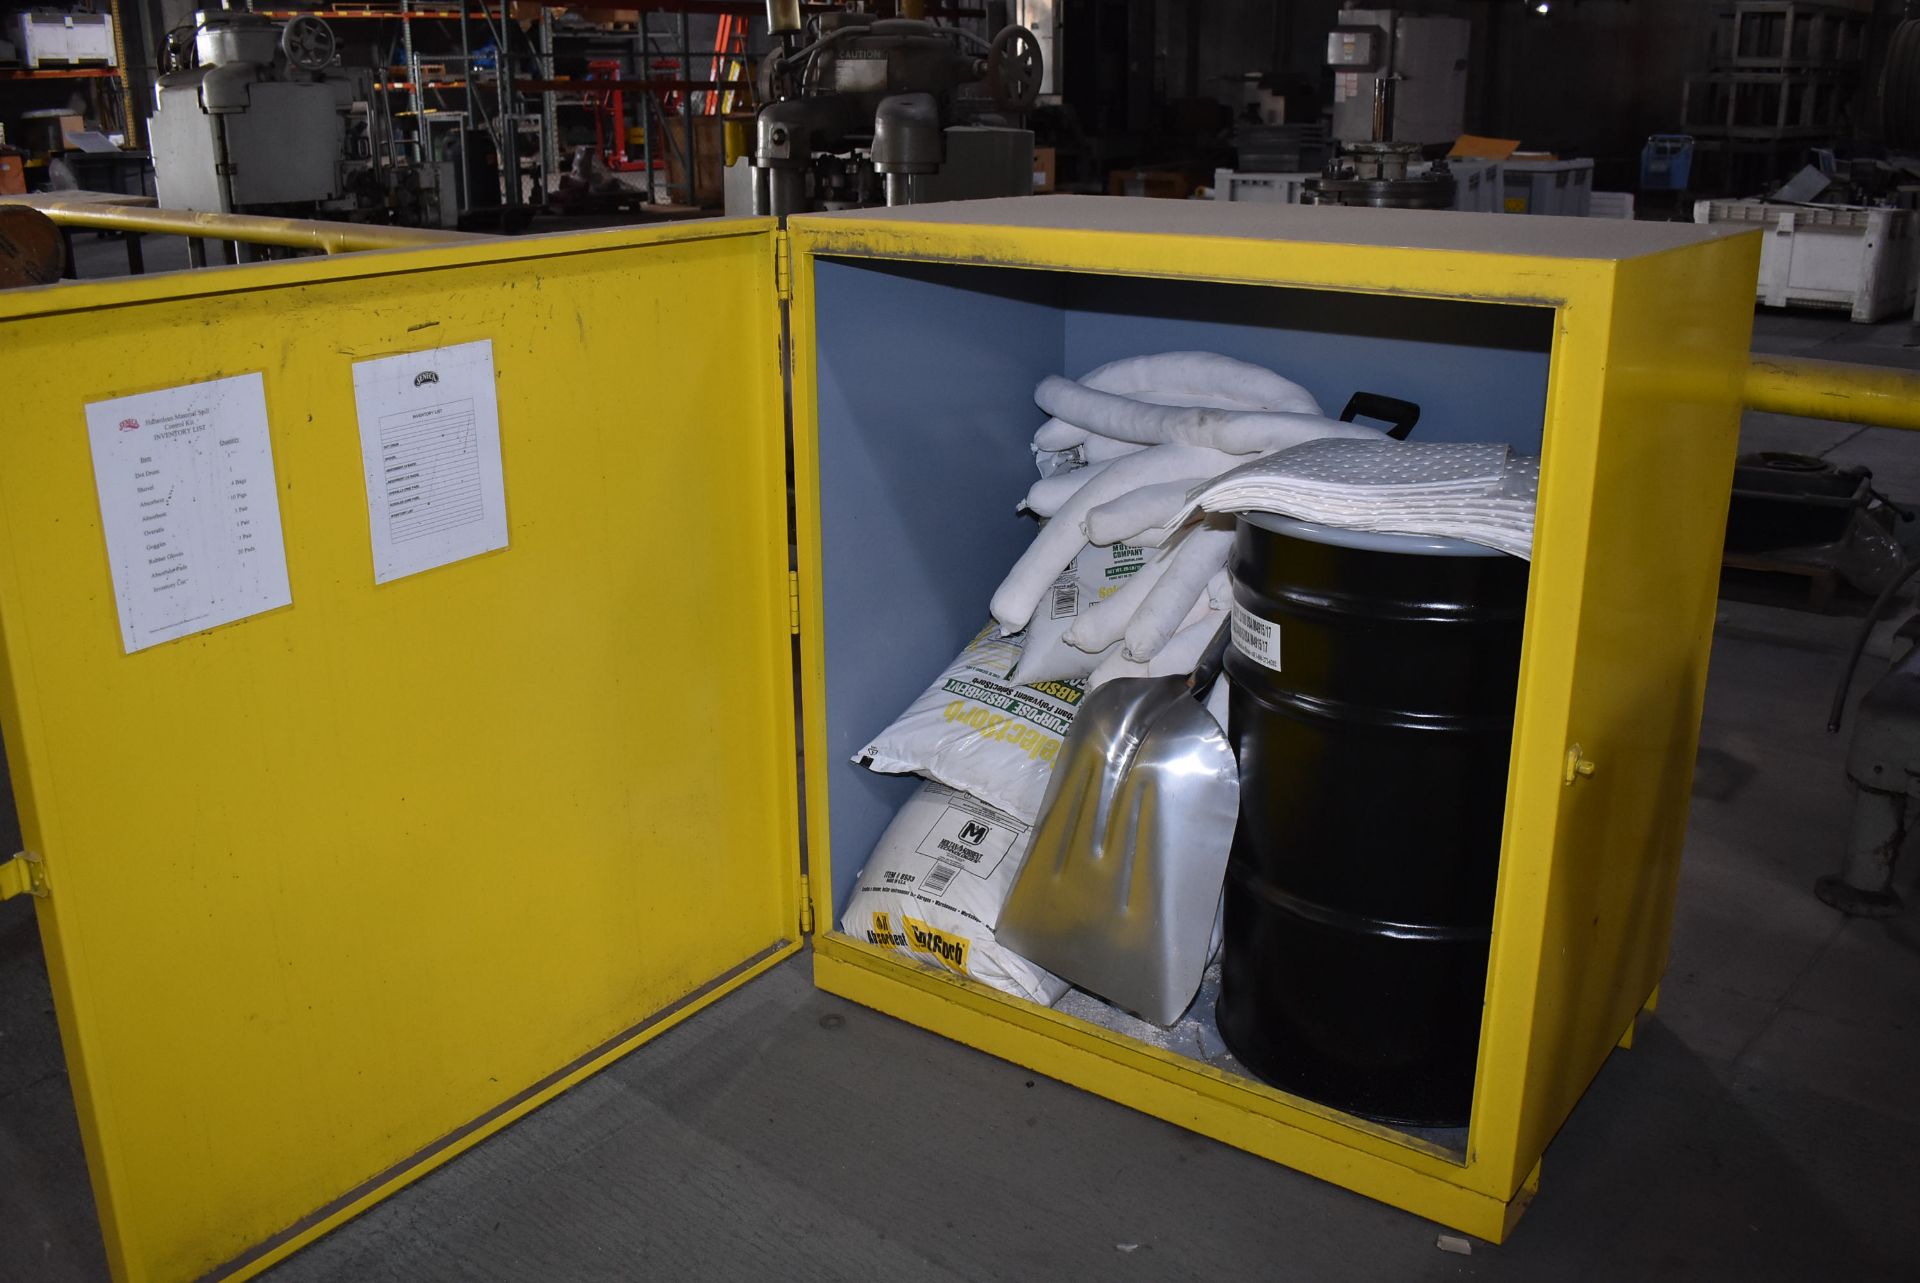 Steel Single Door Cabinet, 48" x 48" w/Contents, Spill Kit, RIGGING FEE: $40 - Image 2 of 2